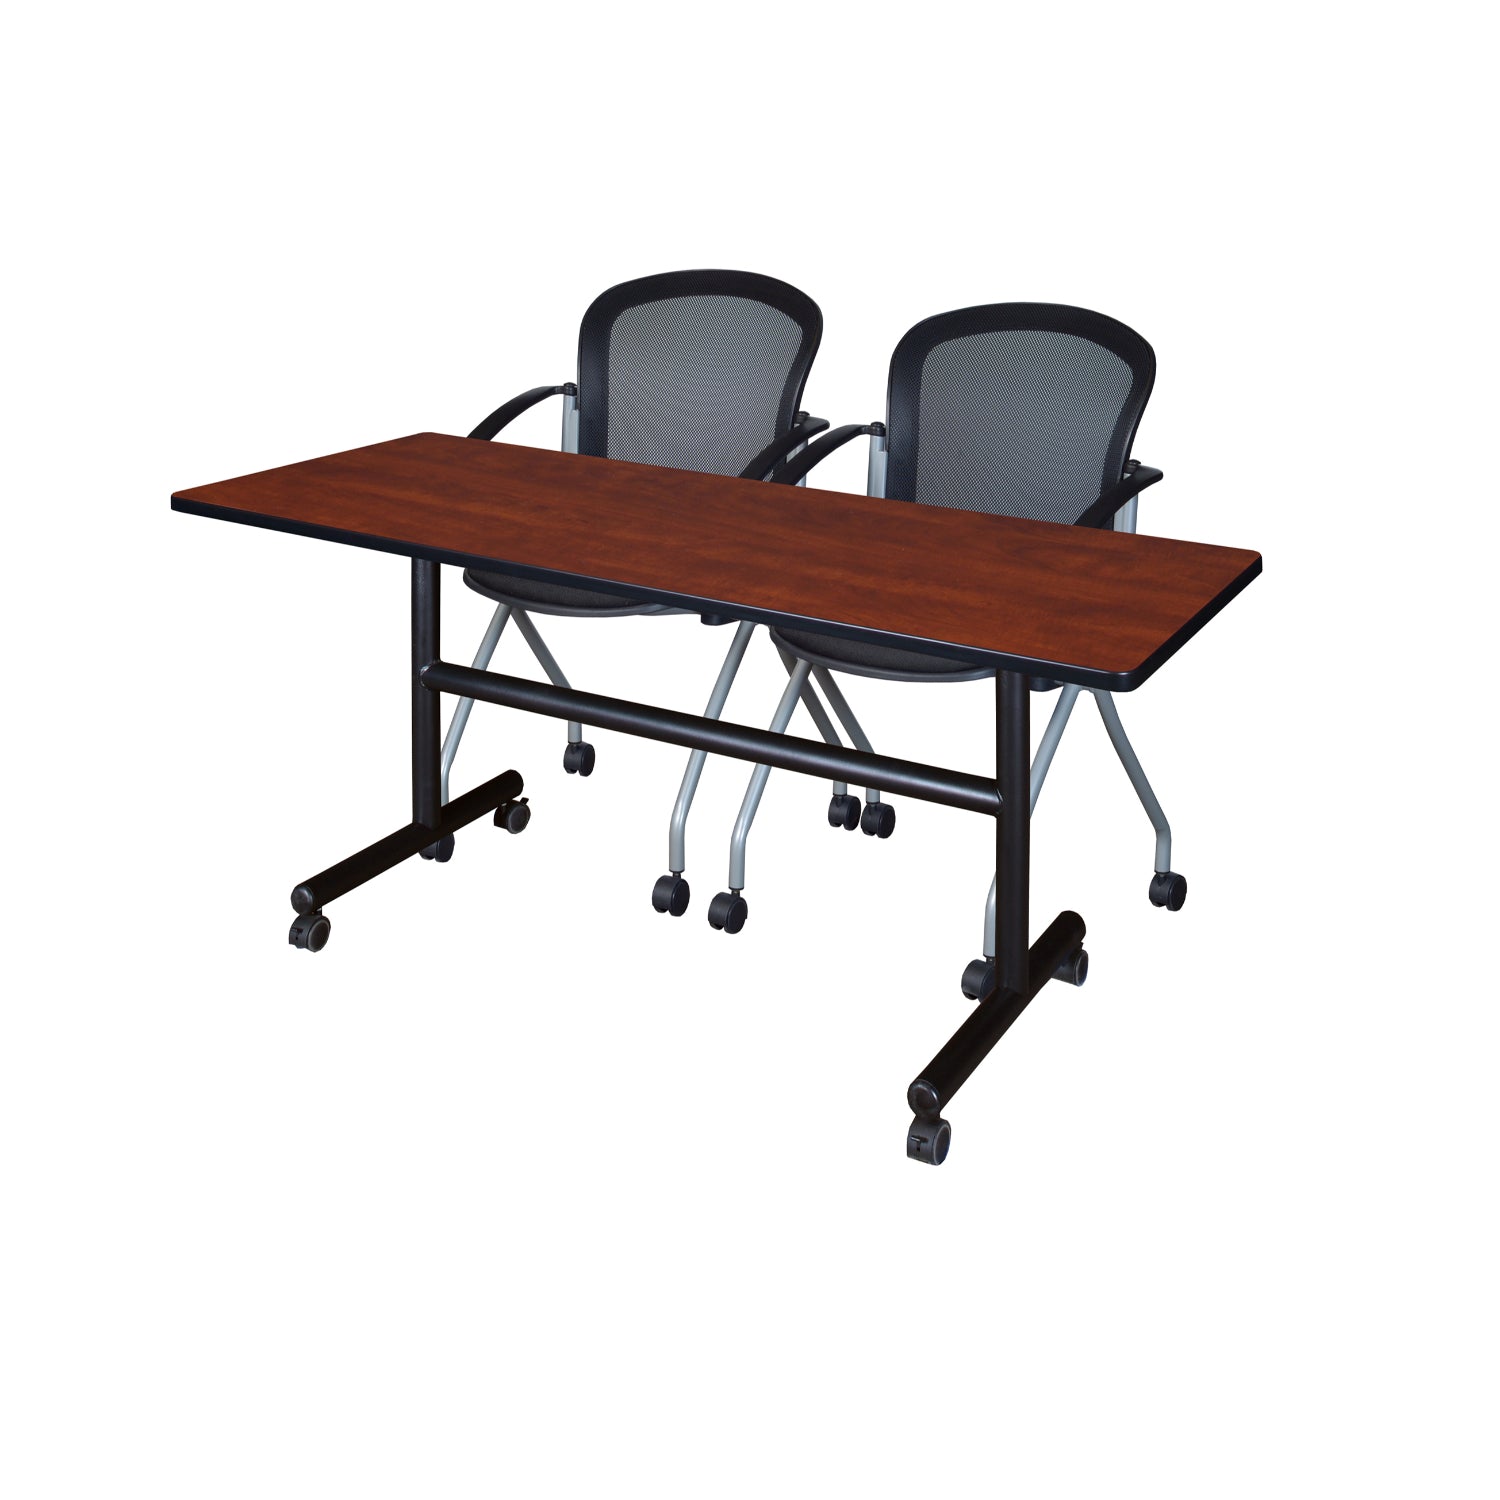 Kobe Flip Top Training Table and Chair Package, Kobe 60" x 30" Flip Top Mobile Nesting Table with 2 Cadence Nesting Chairs